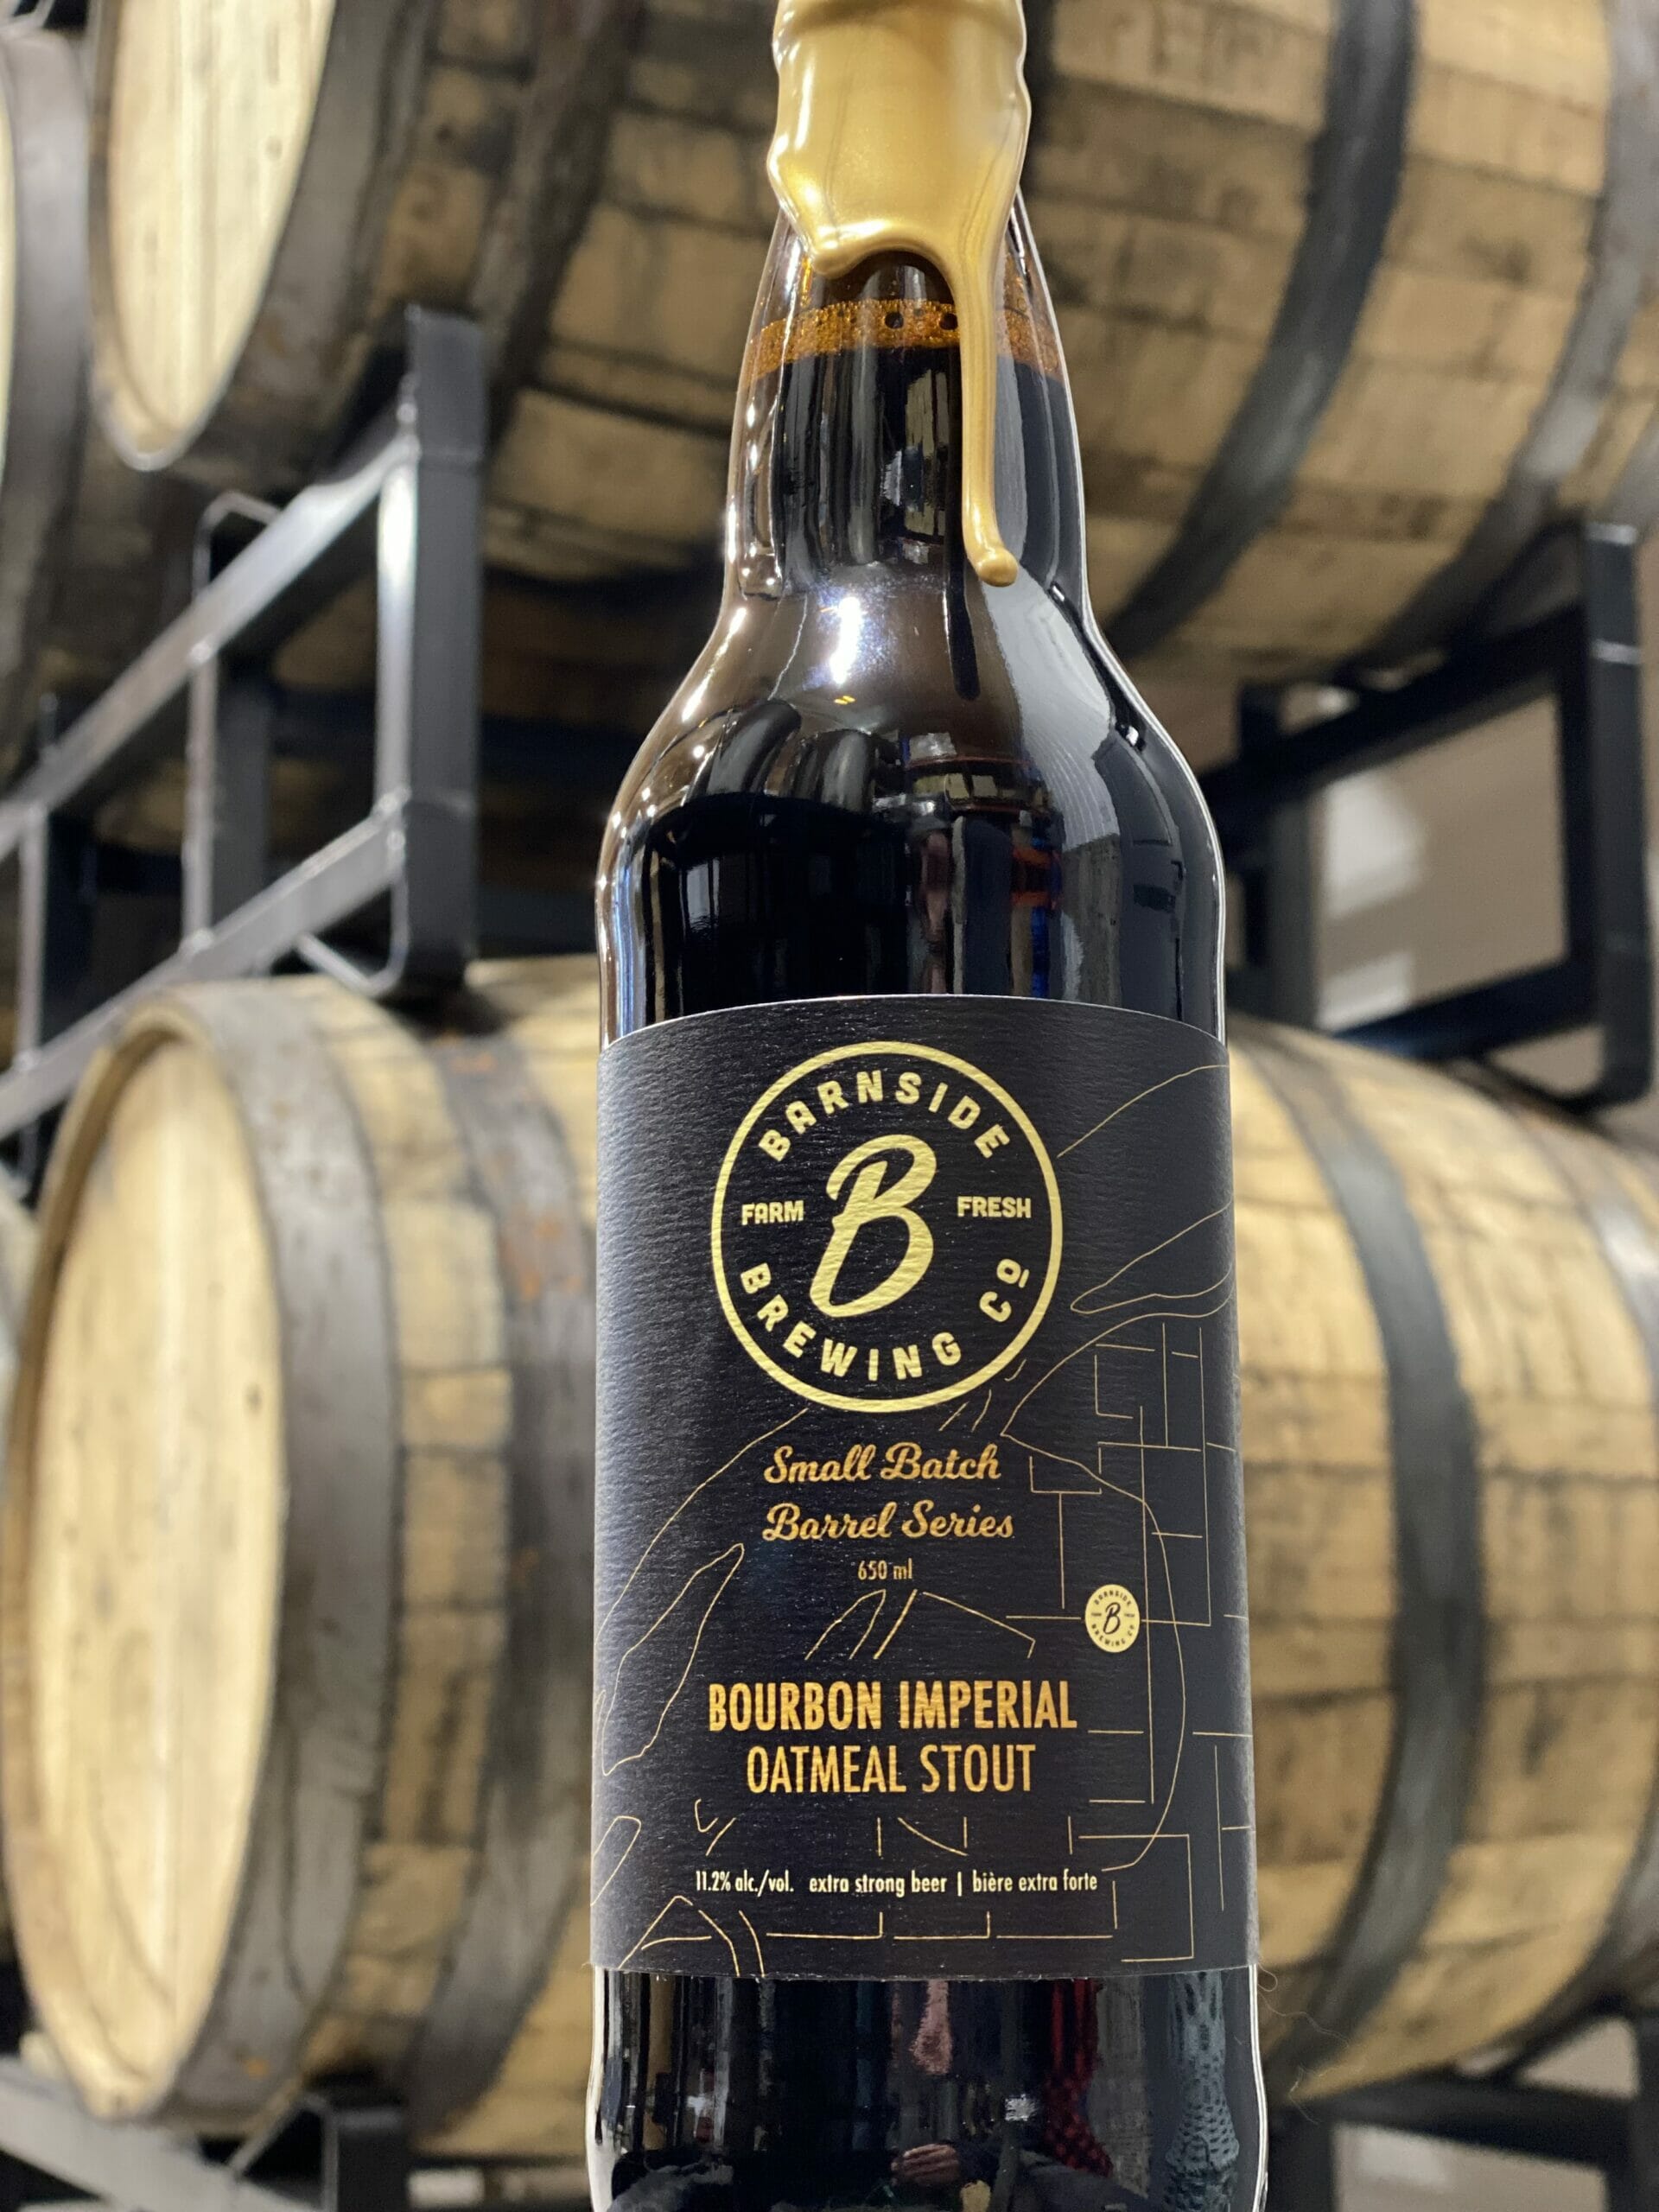 Bourbon Imperial Oatmeal Stout - Barnside Brewing